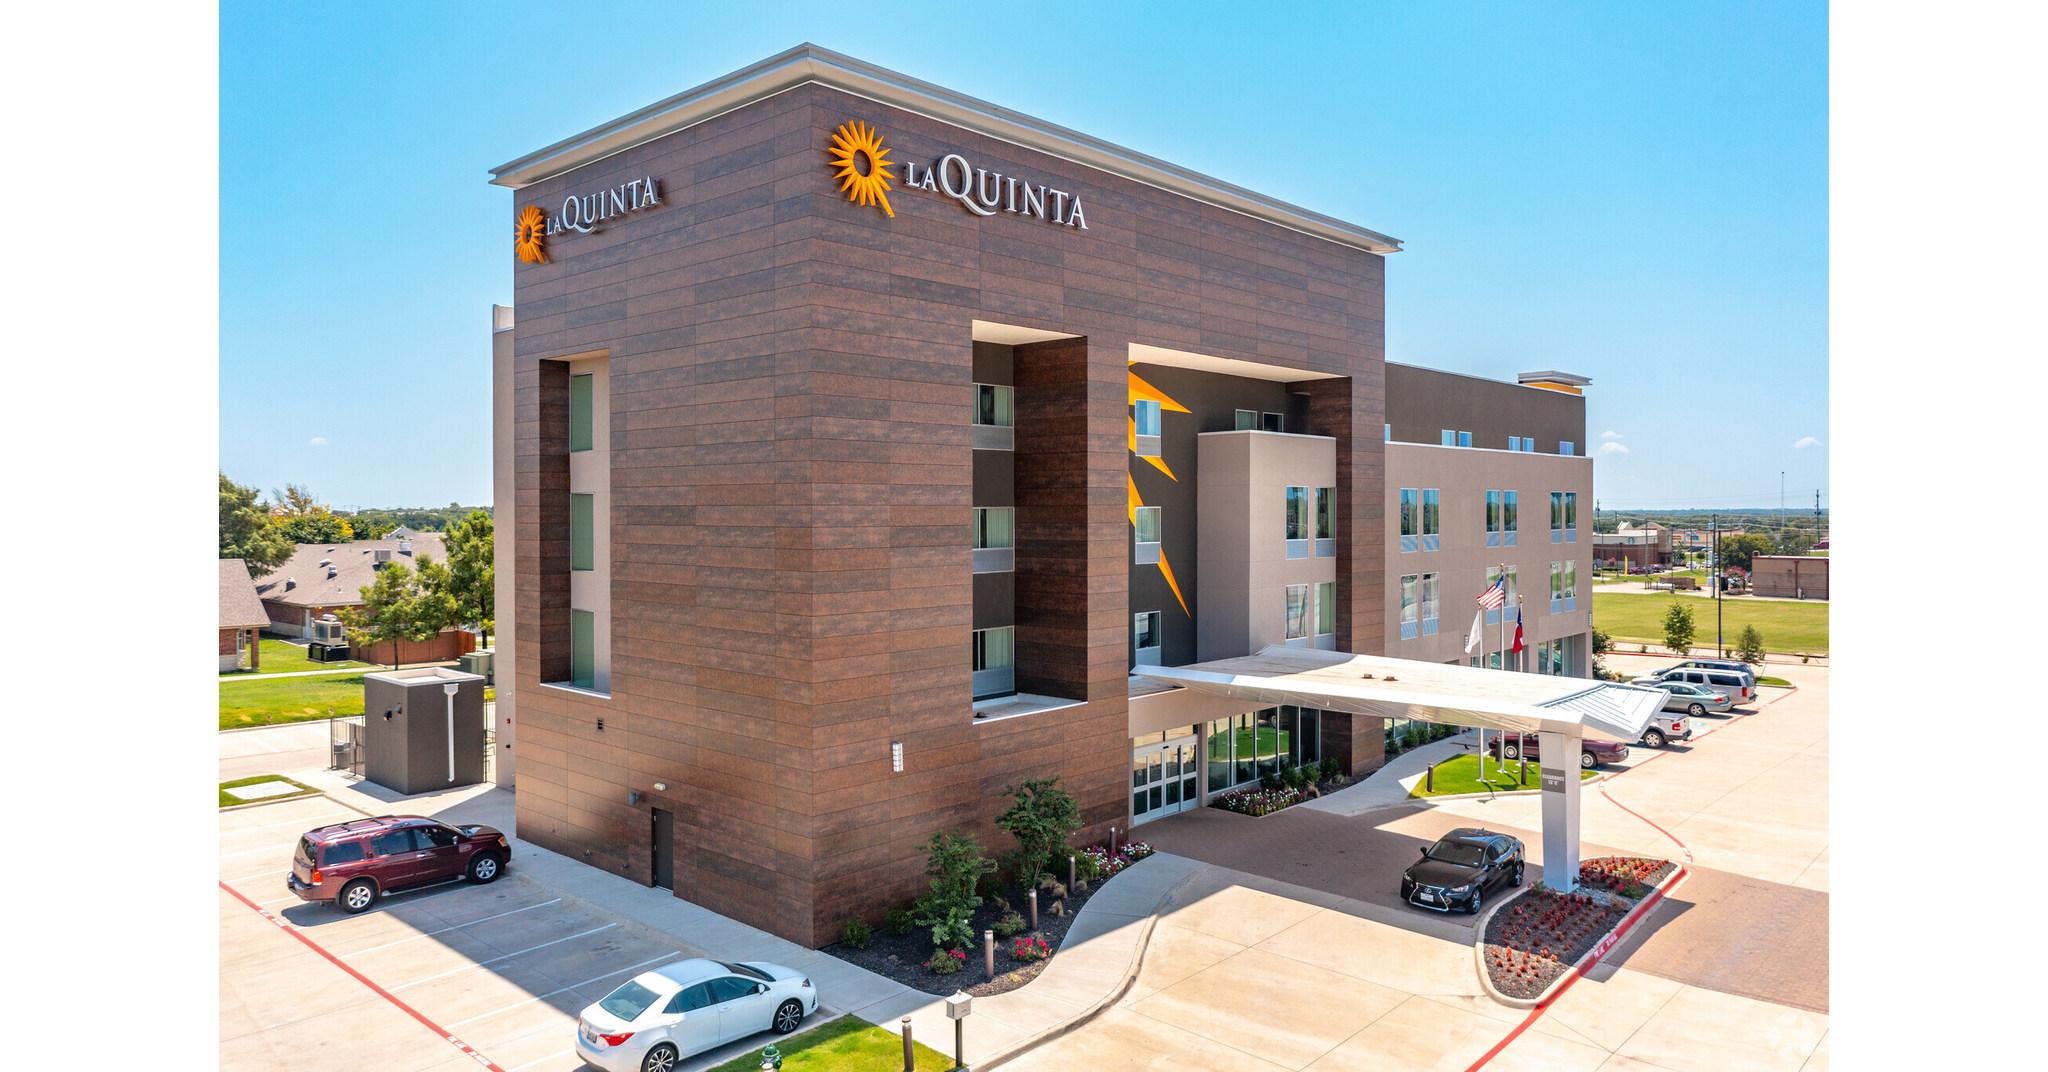  Mohr Partners Transacts on Newly Developed La Quinta Hotel in Red Oak, TX 